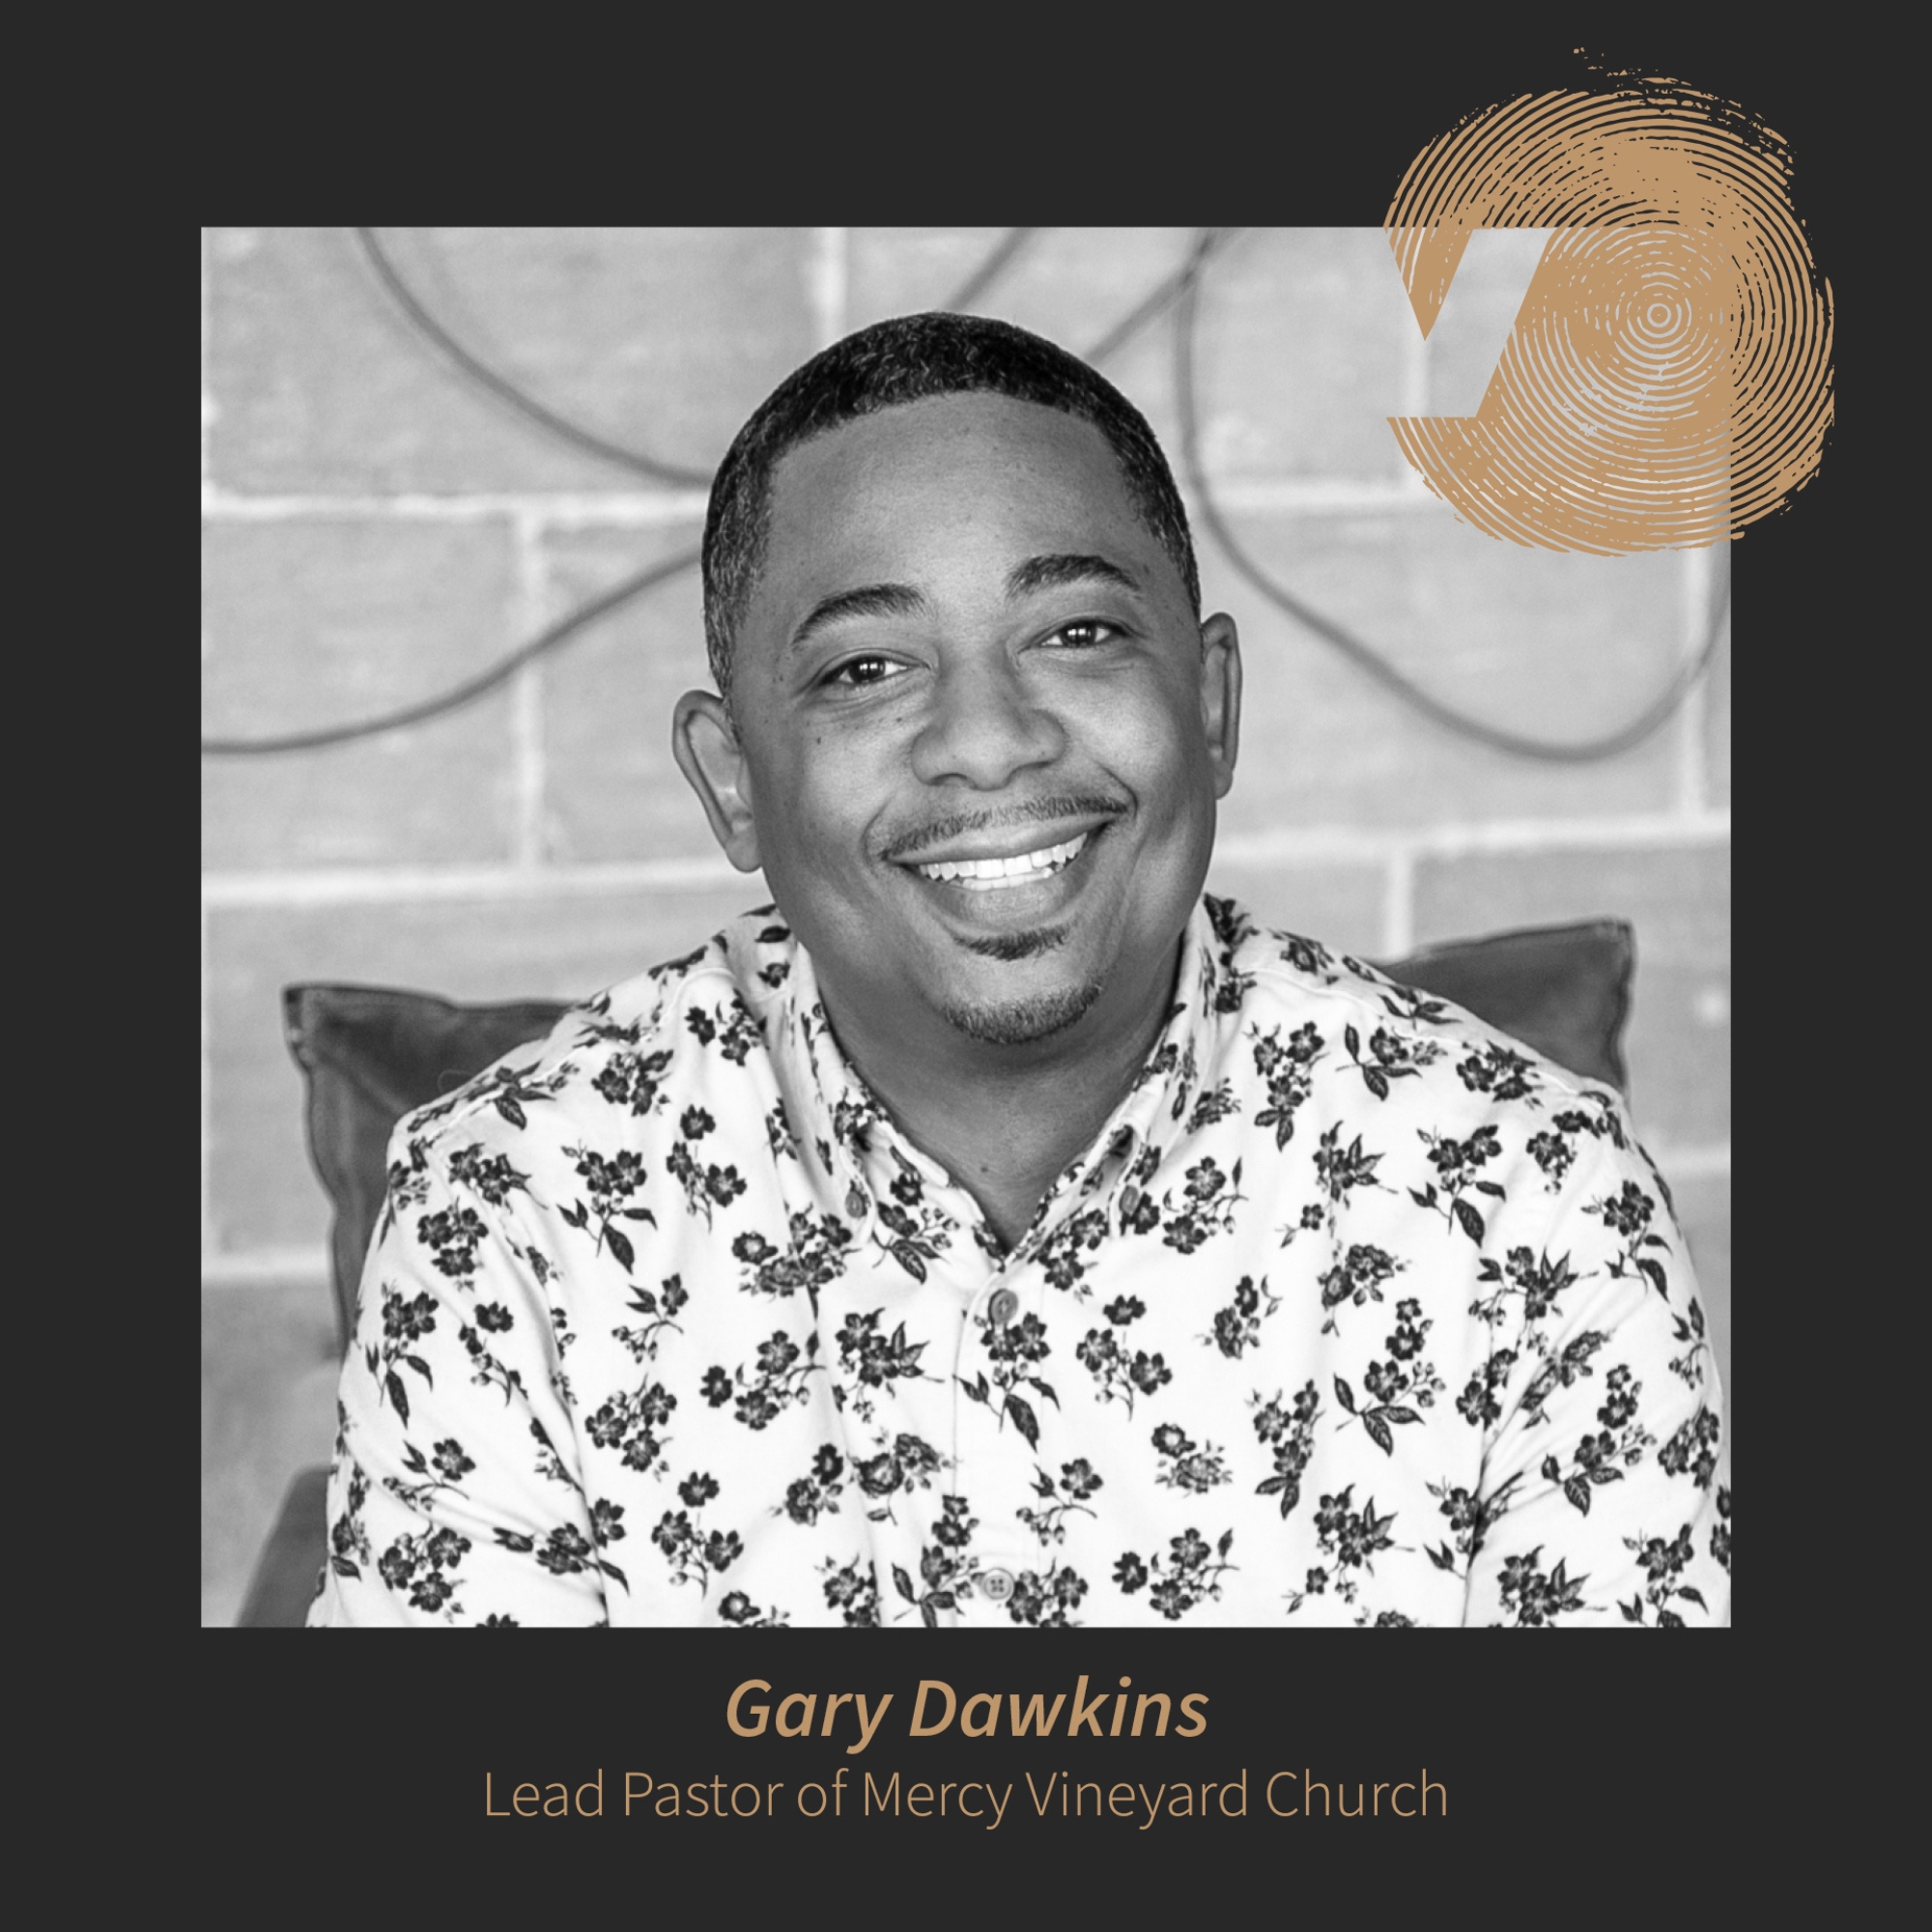 Building Multi-Ethnic Communities and Bringing Your Whole Self with Gary Dawkins